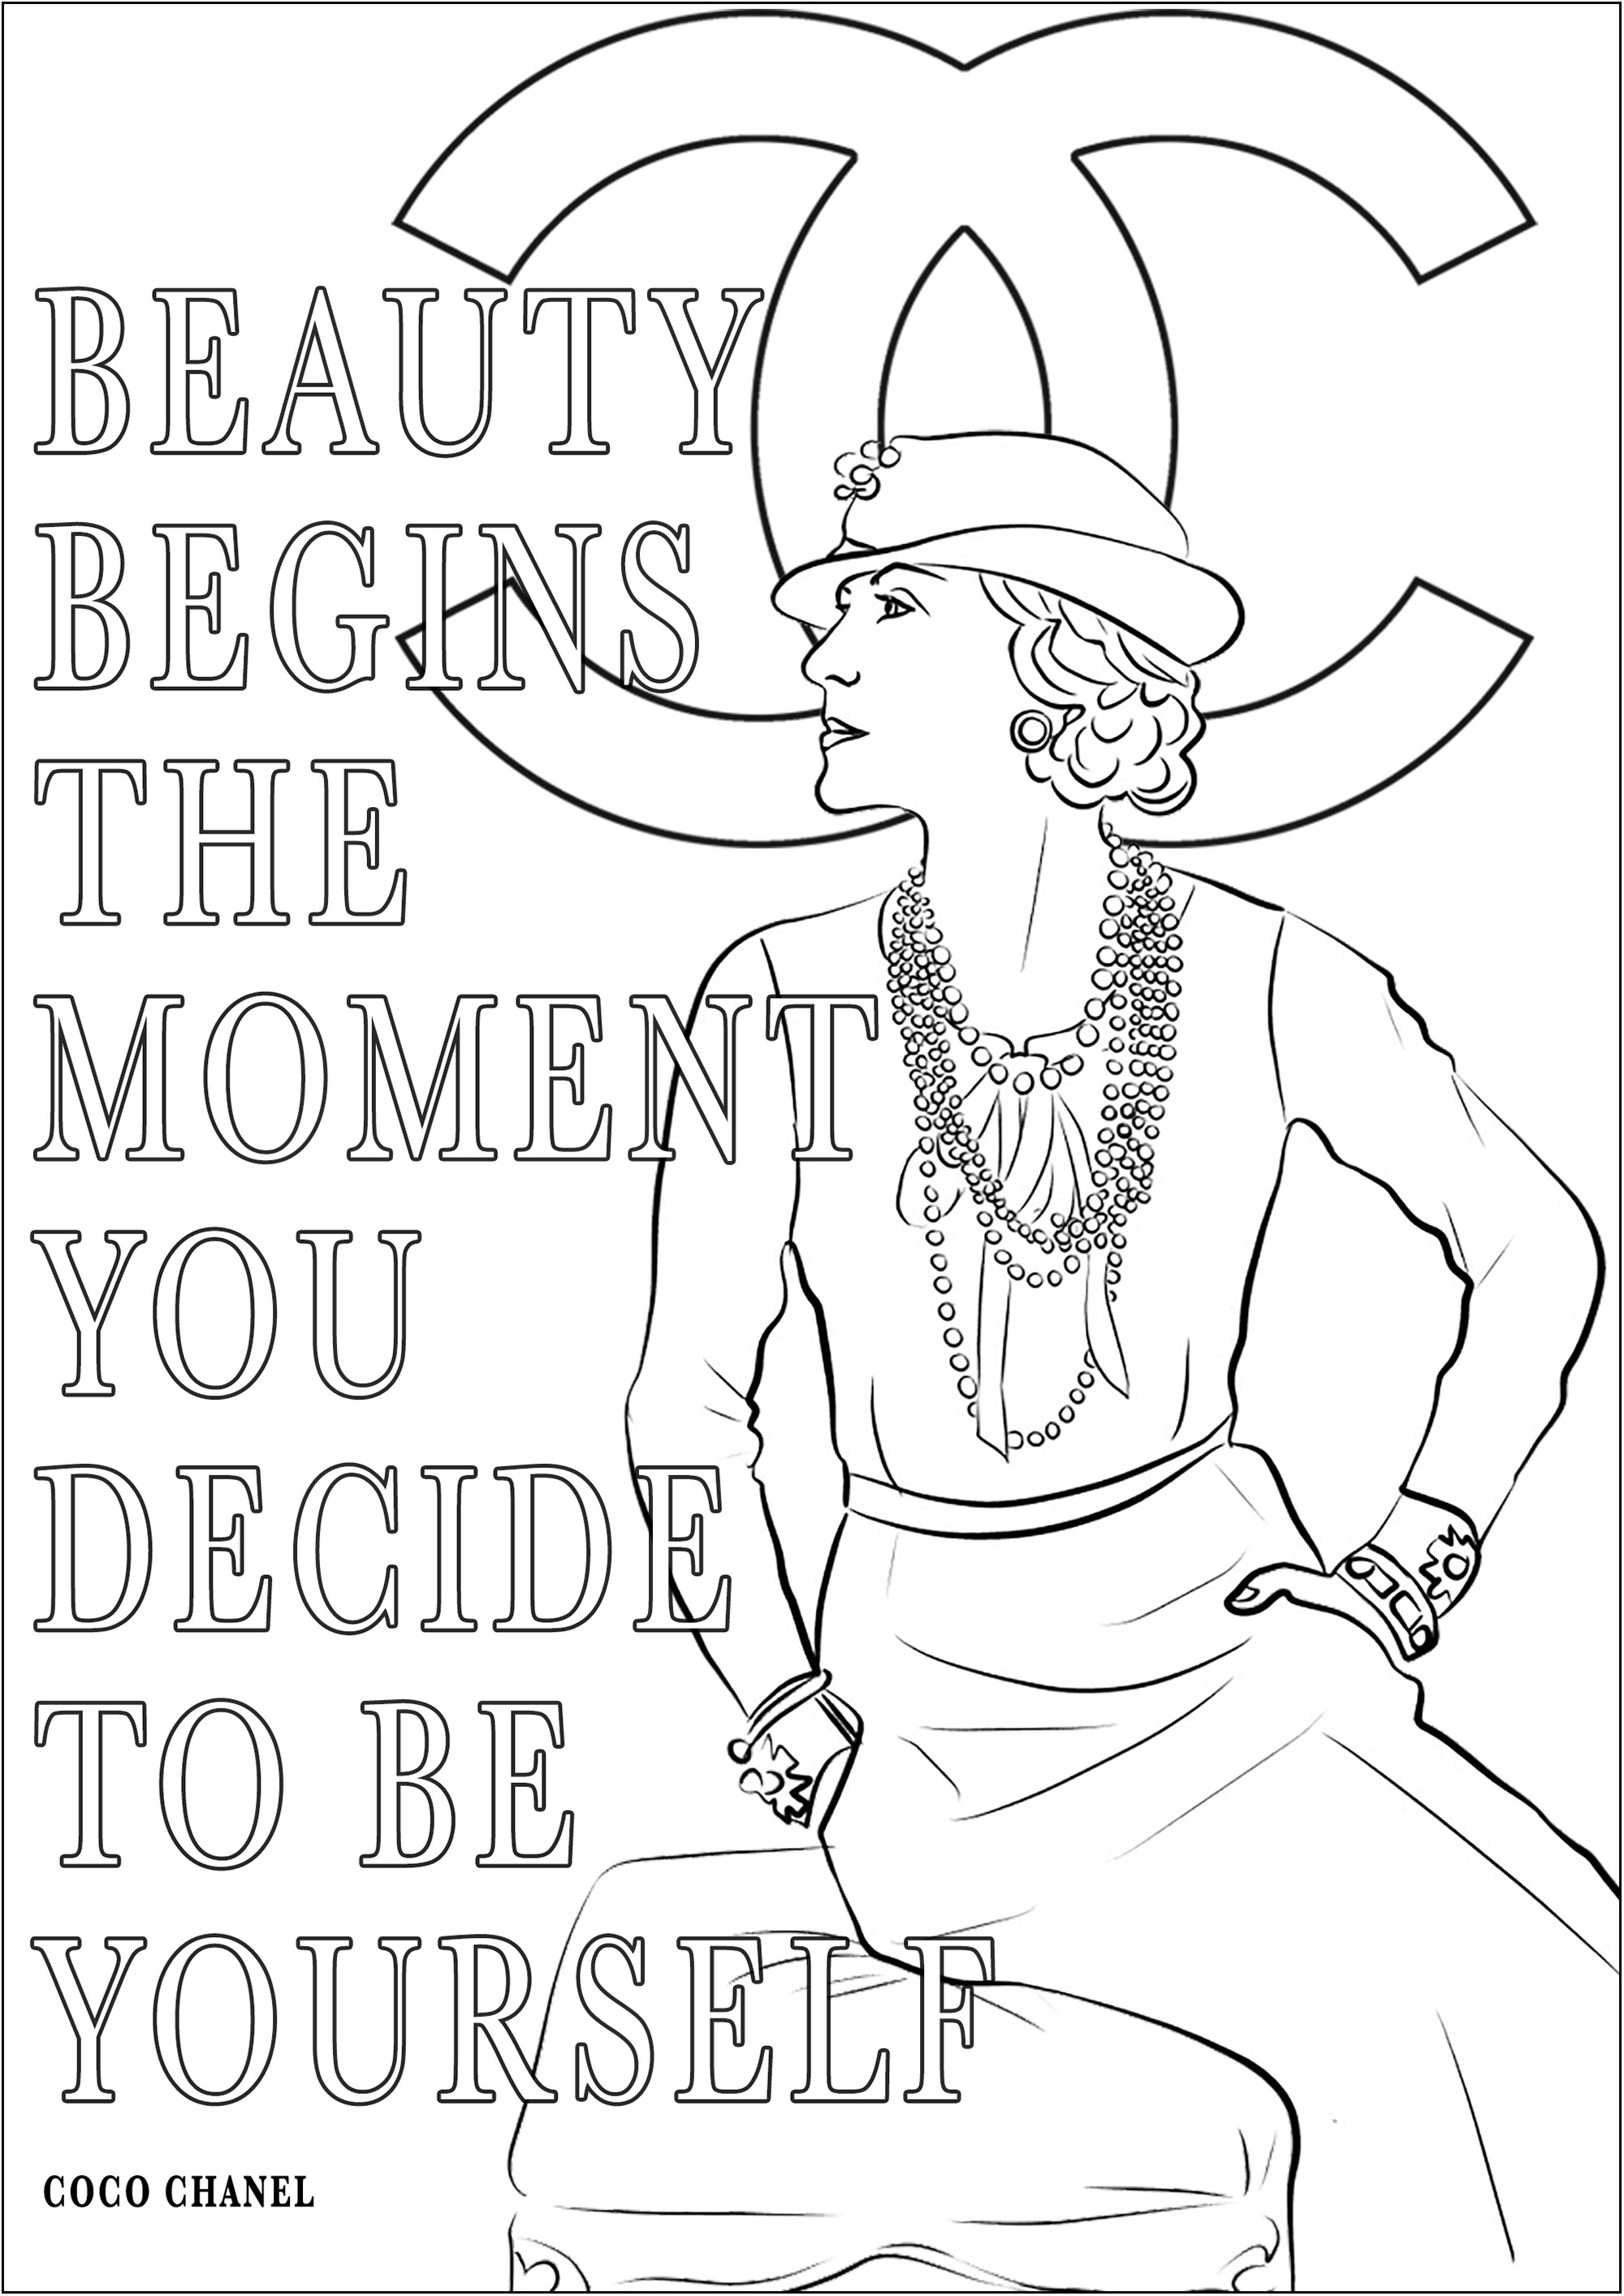 Coco Chanel and his quote 'Beauty begins the moment you decide to be yourself'. It means 'Beauty begins the moment you decide to be yourself'.Coco Chanel, born in 1883, was a revolutionary French fashion designer who transformed the industry with her timeless creations, such as the famous Chanel suit and the little black dress.